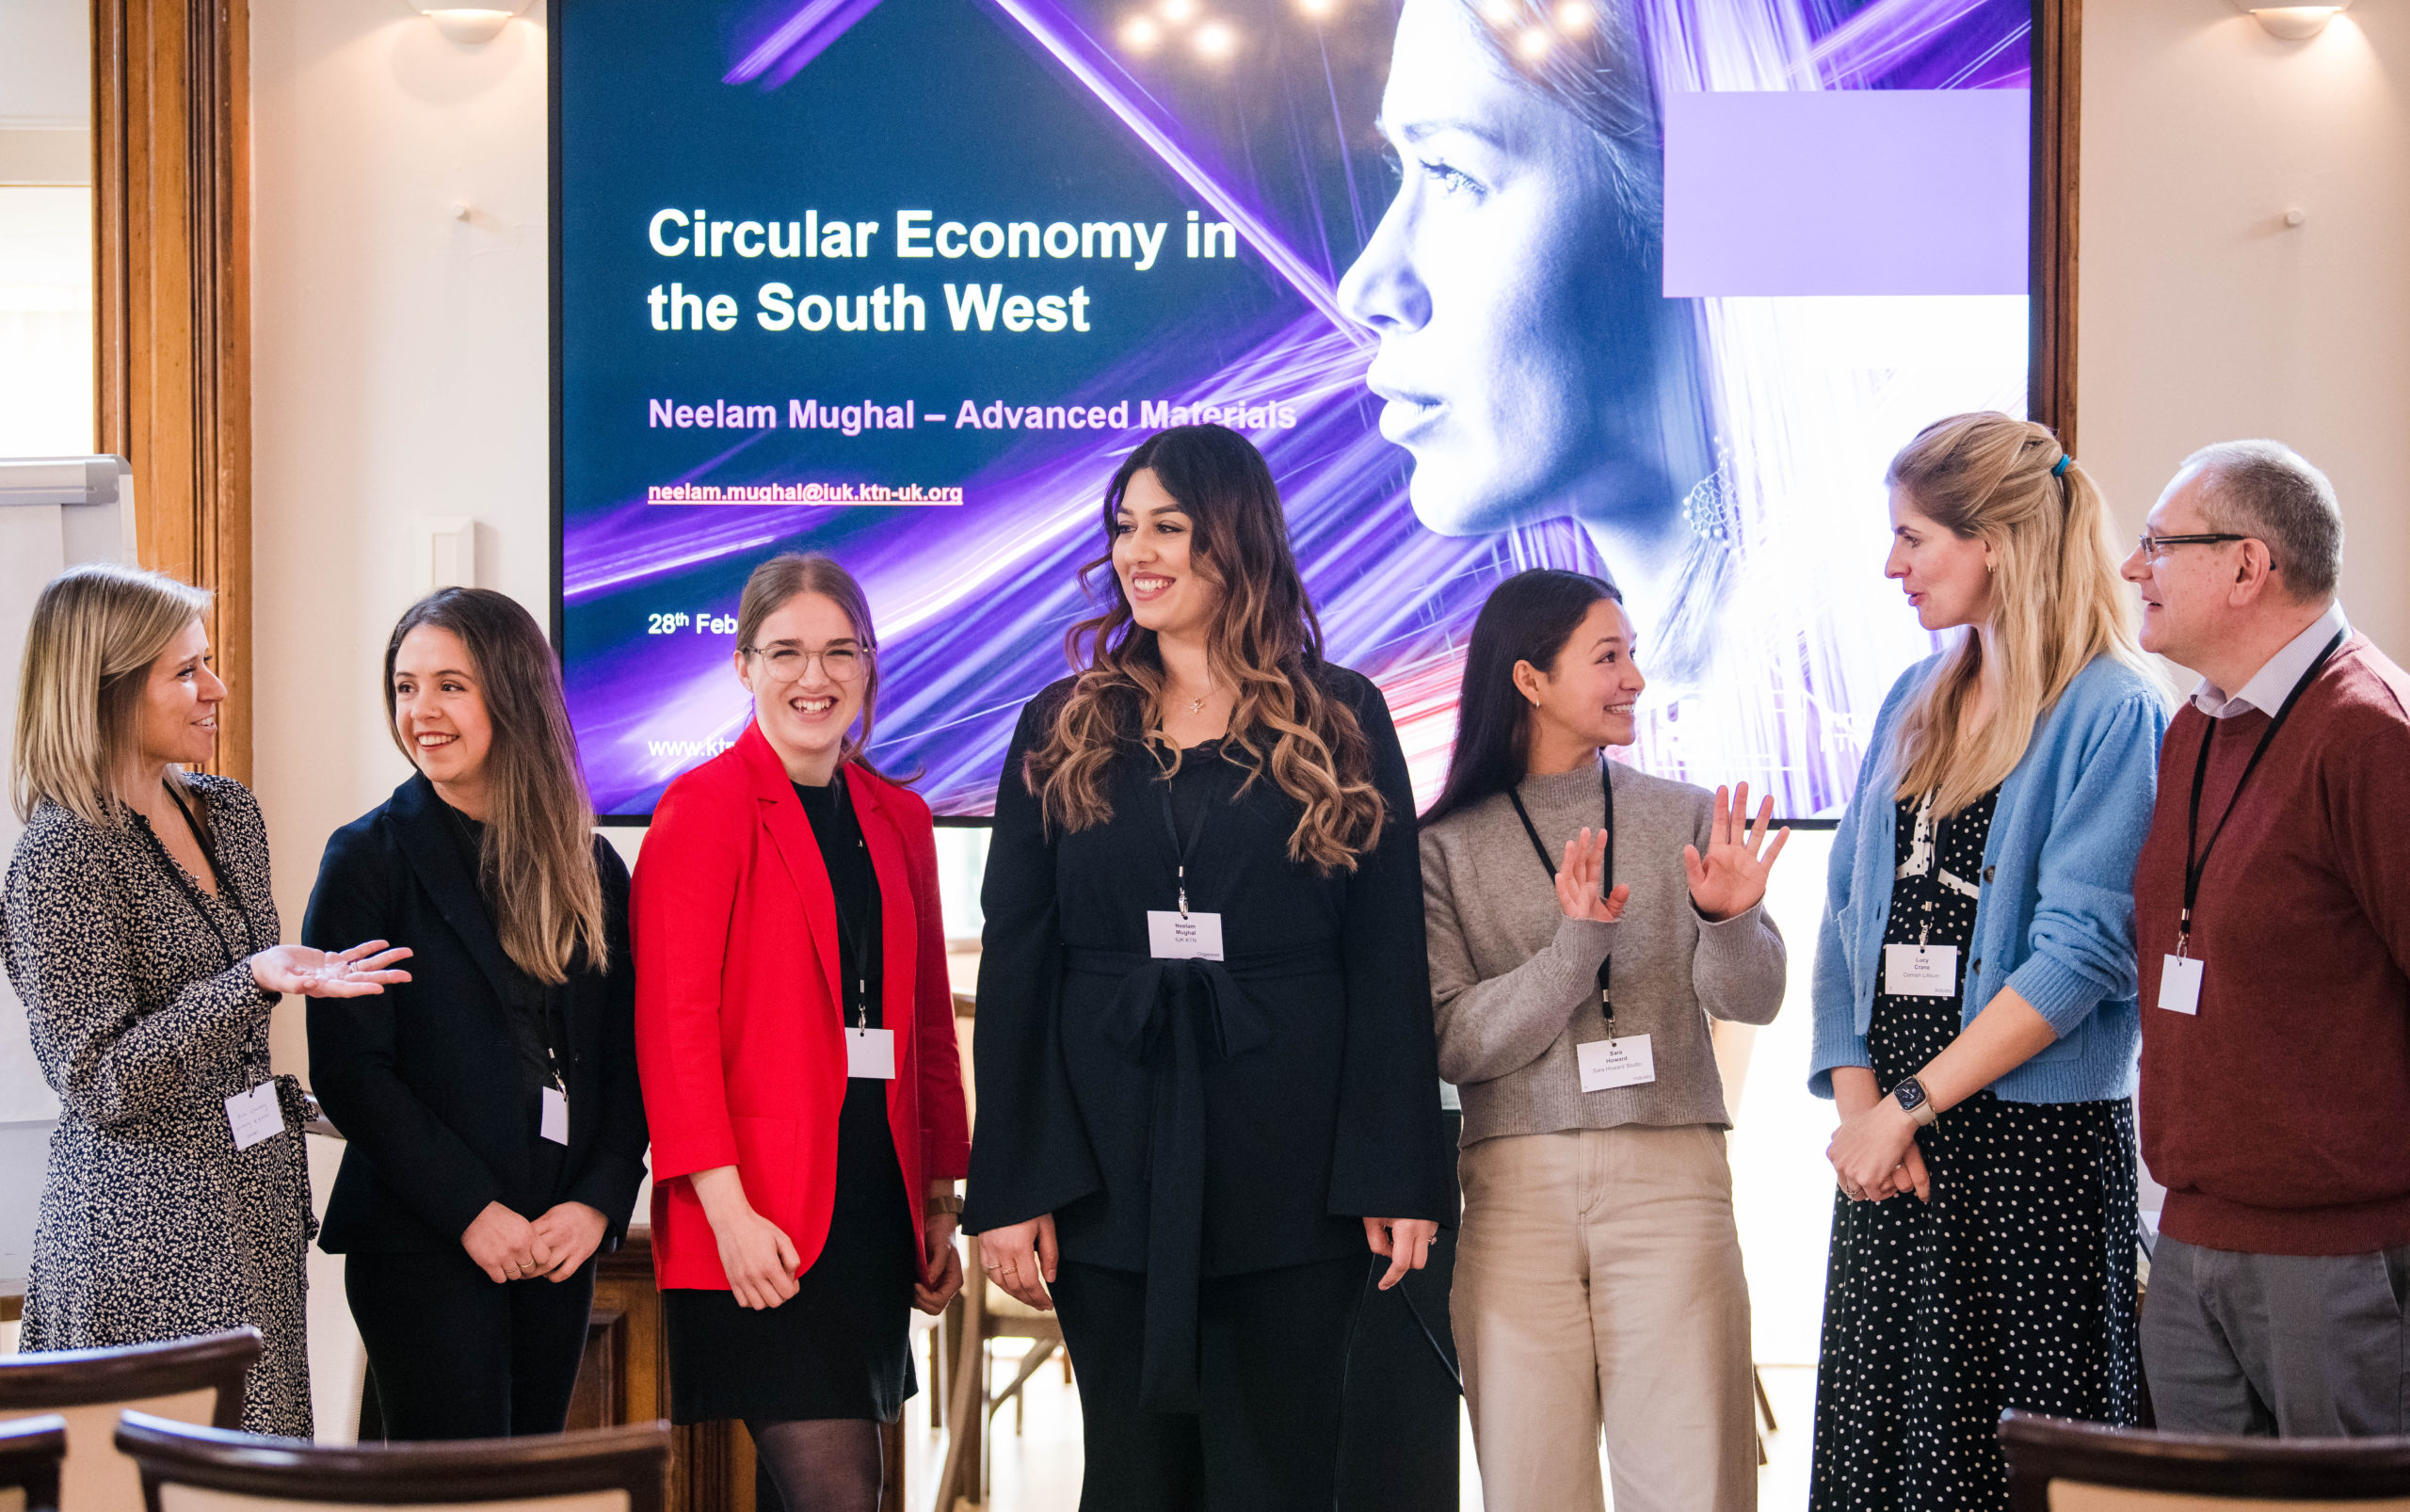 Circular Economy in the South West – Workshop & Networking Event Roundup